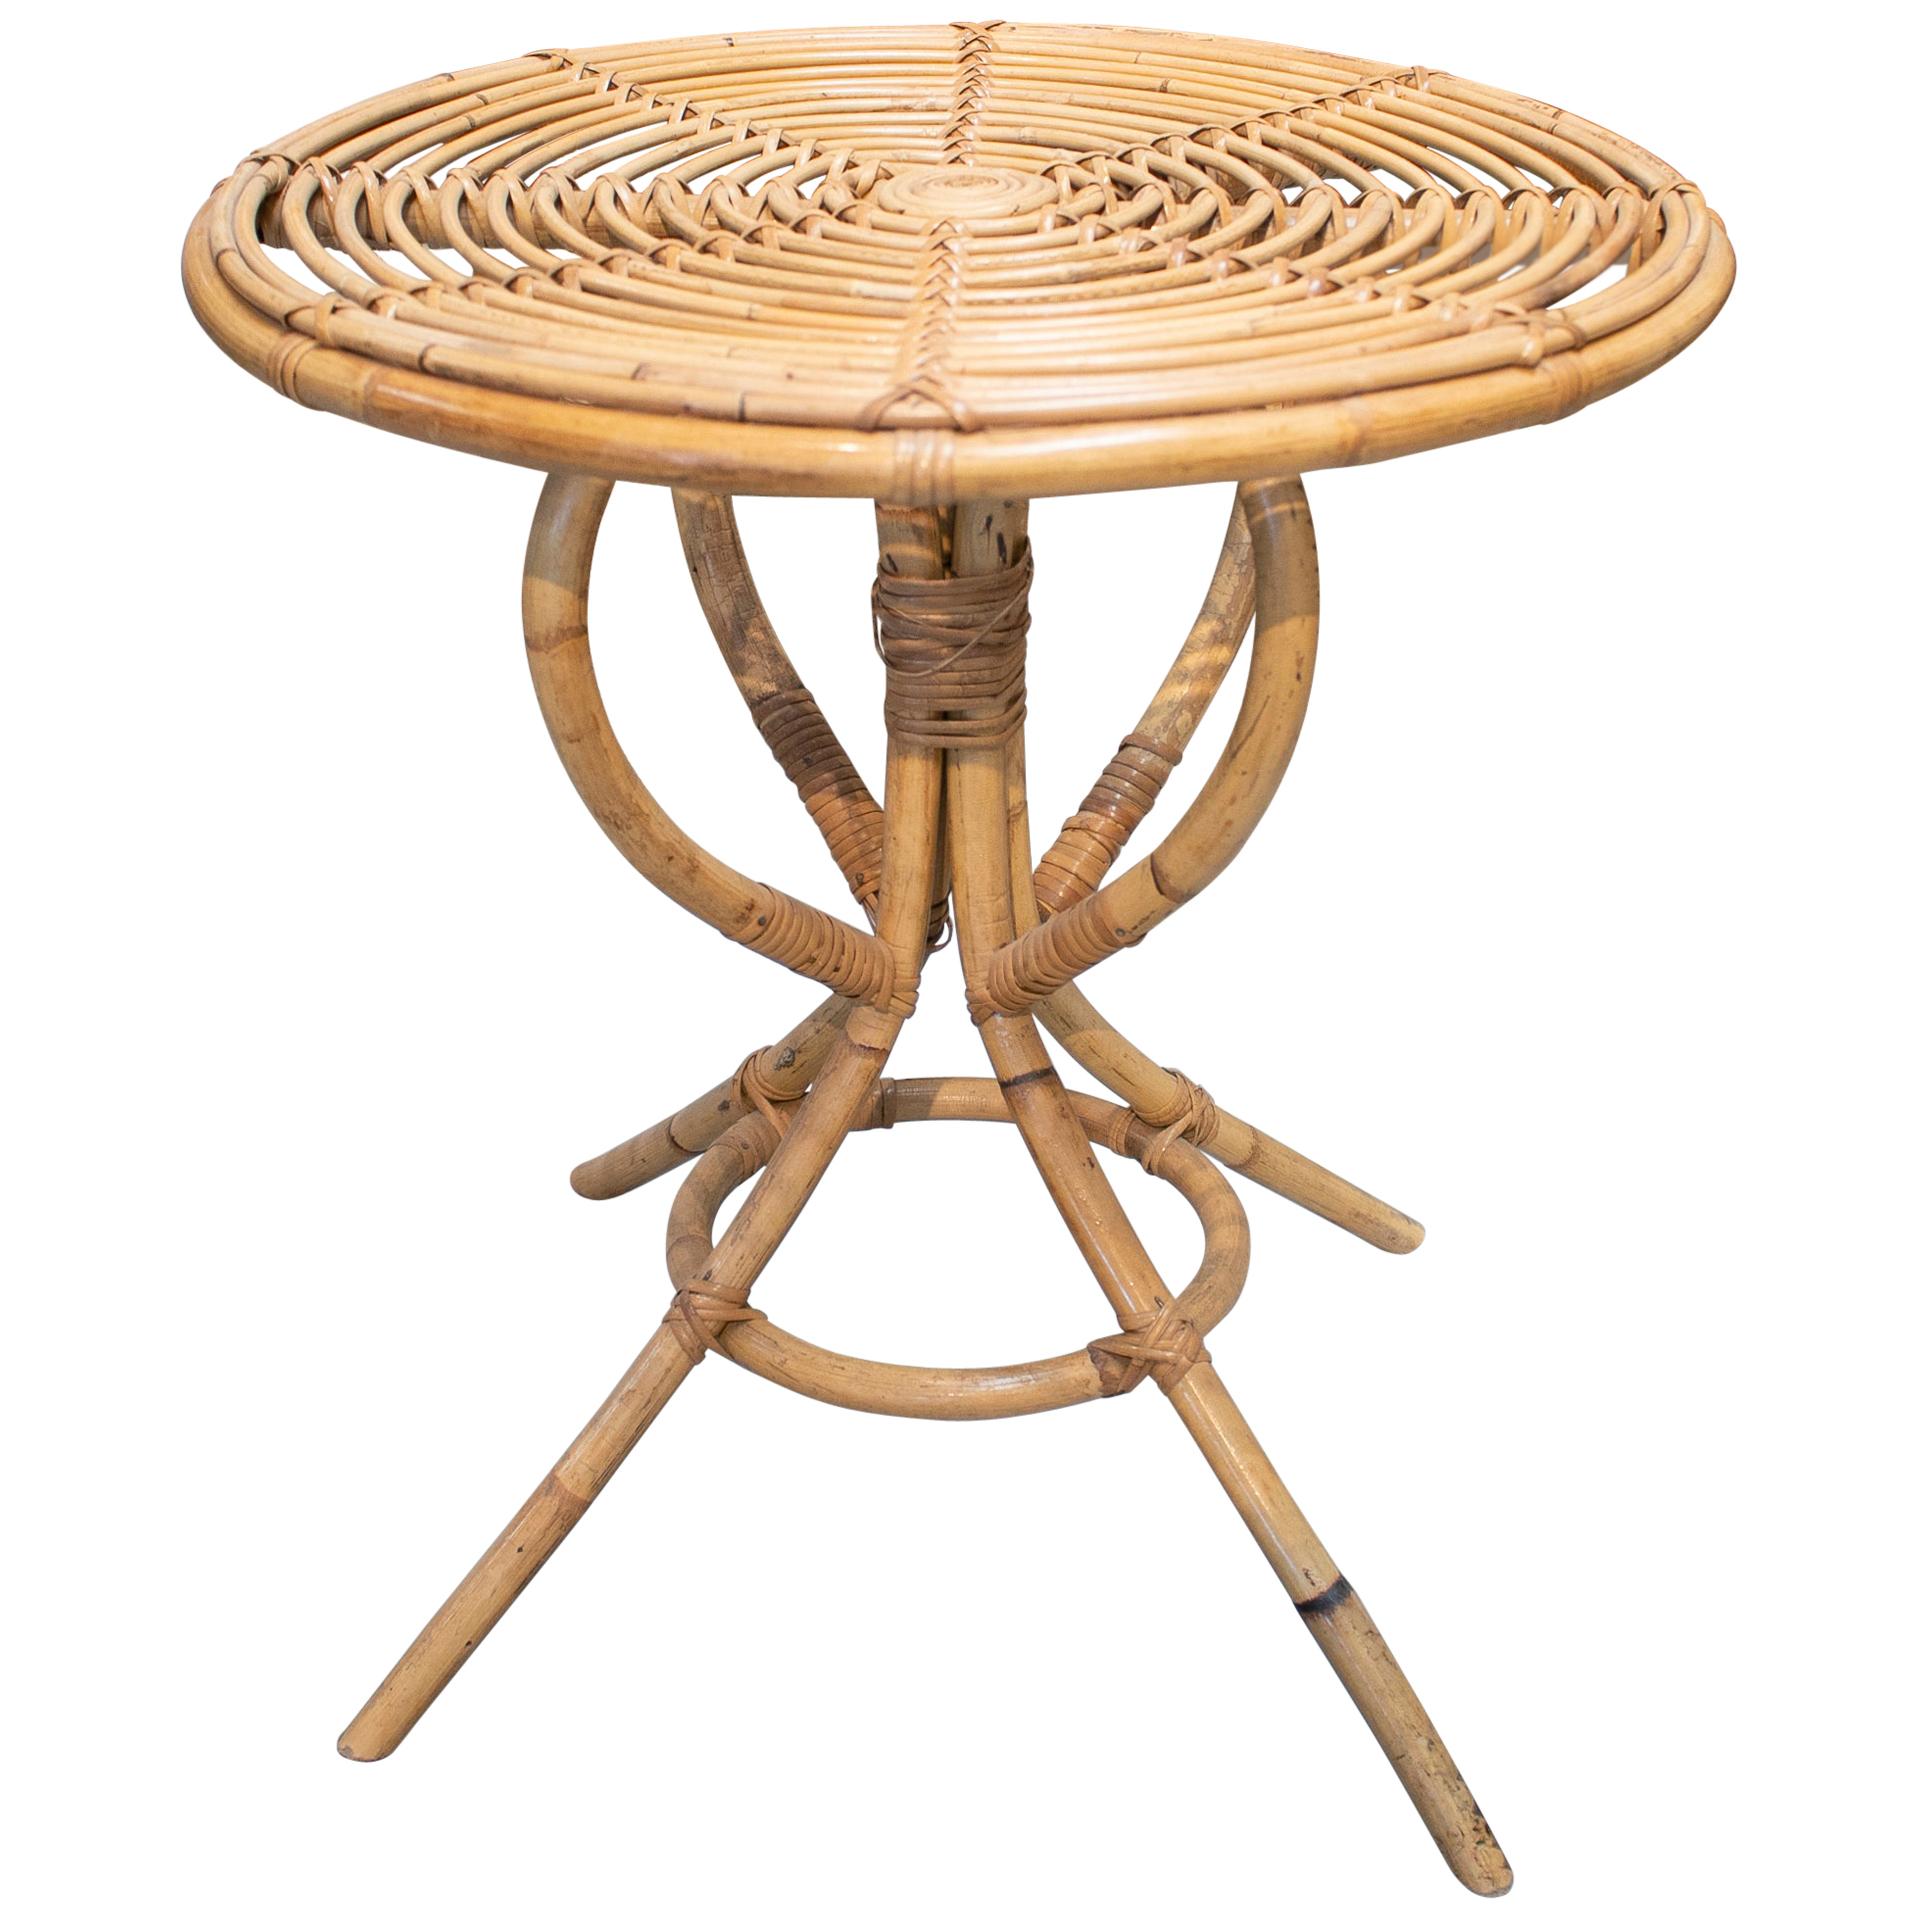 1980s Spanish Bamboo Round Side Table